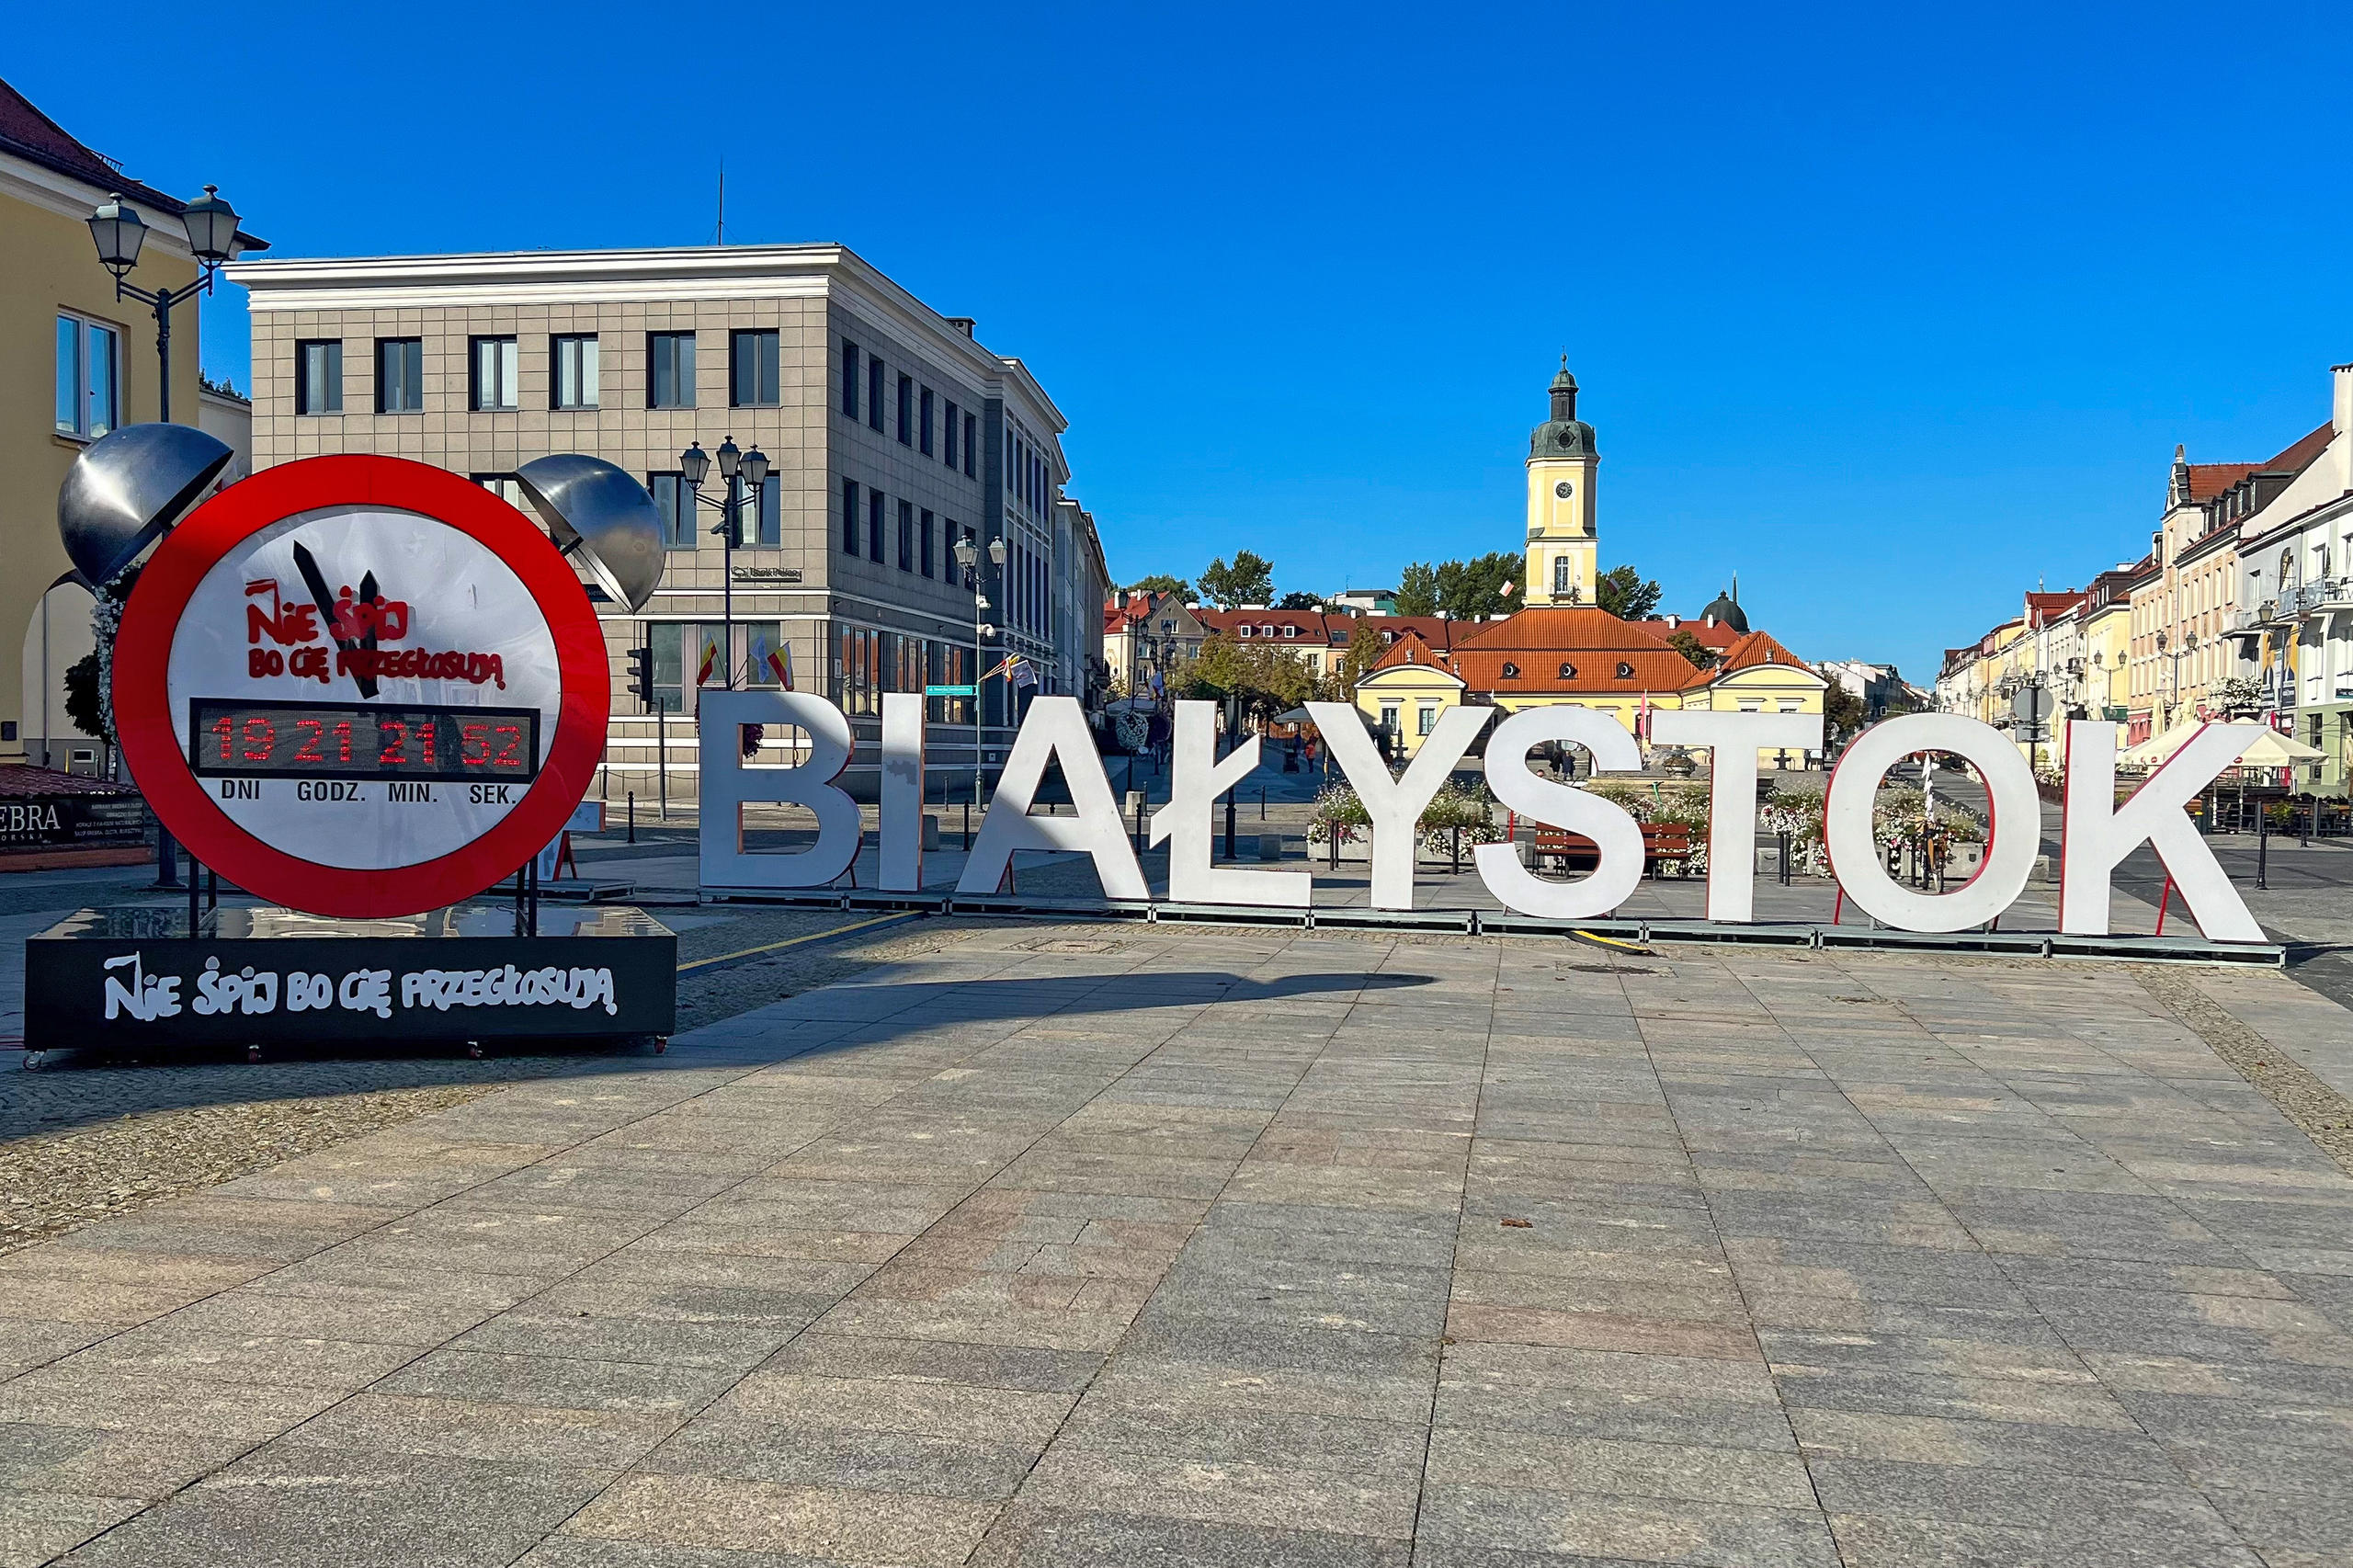 A large clock and the word “Bialystok” in equally large letters